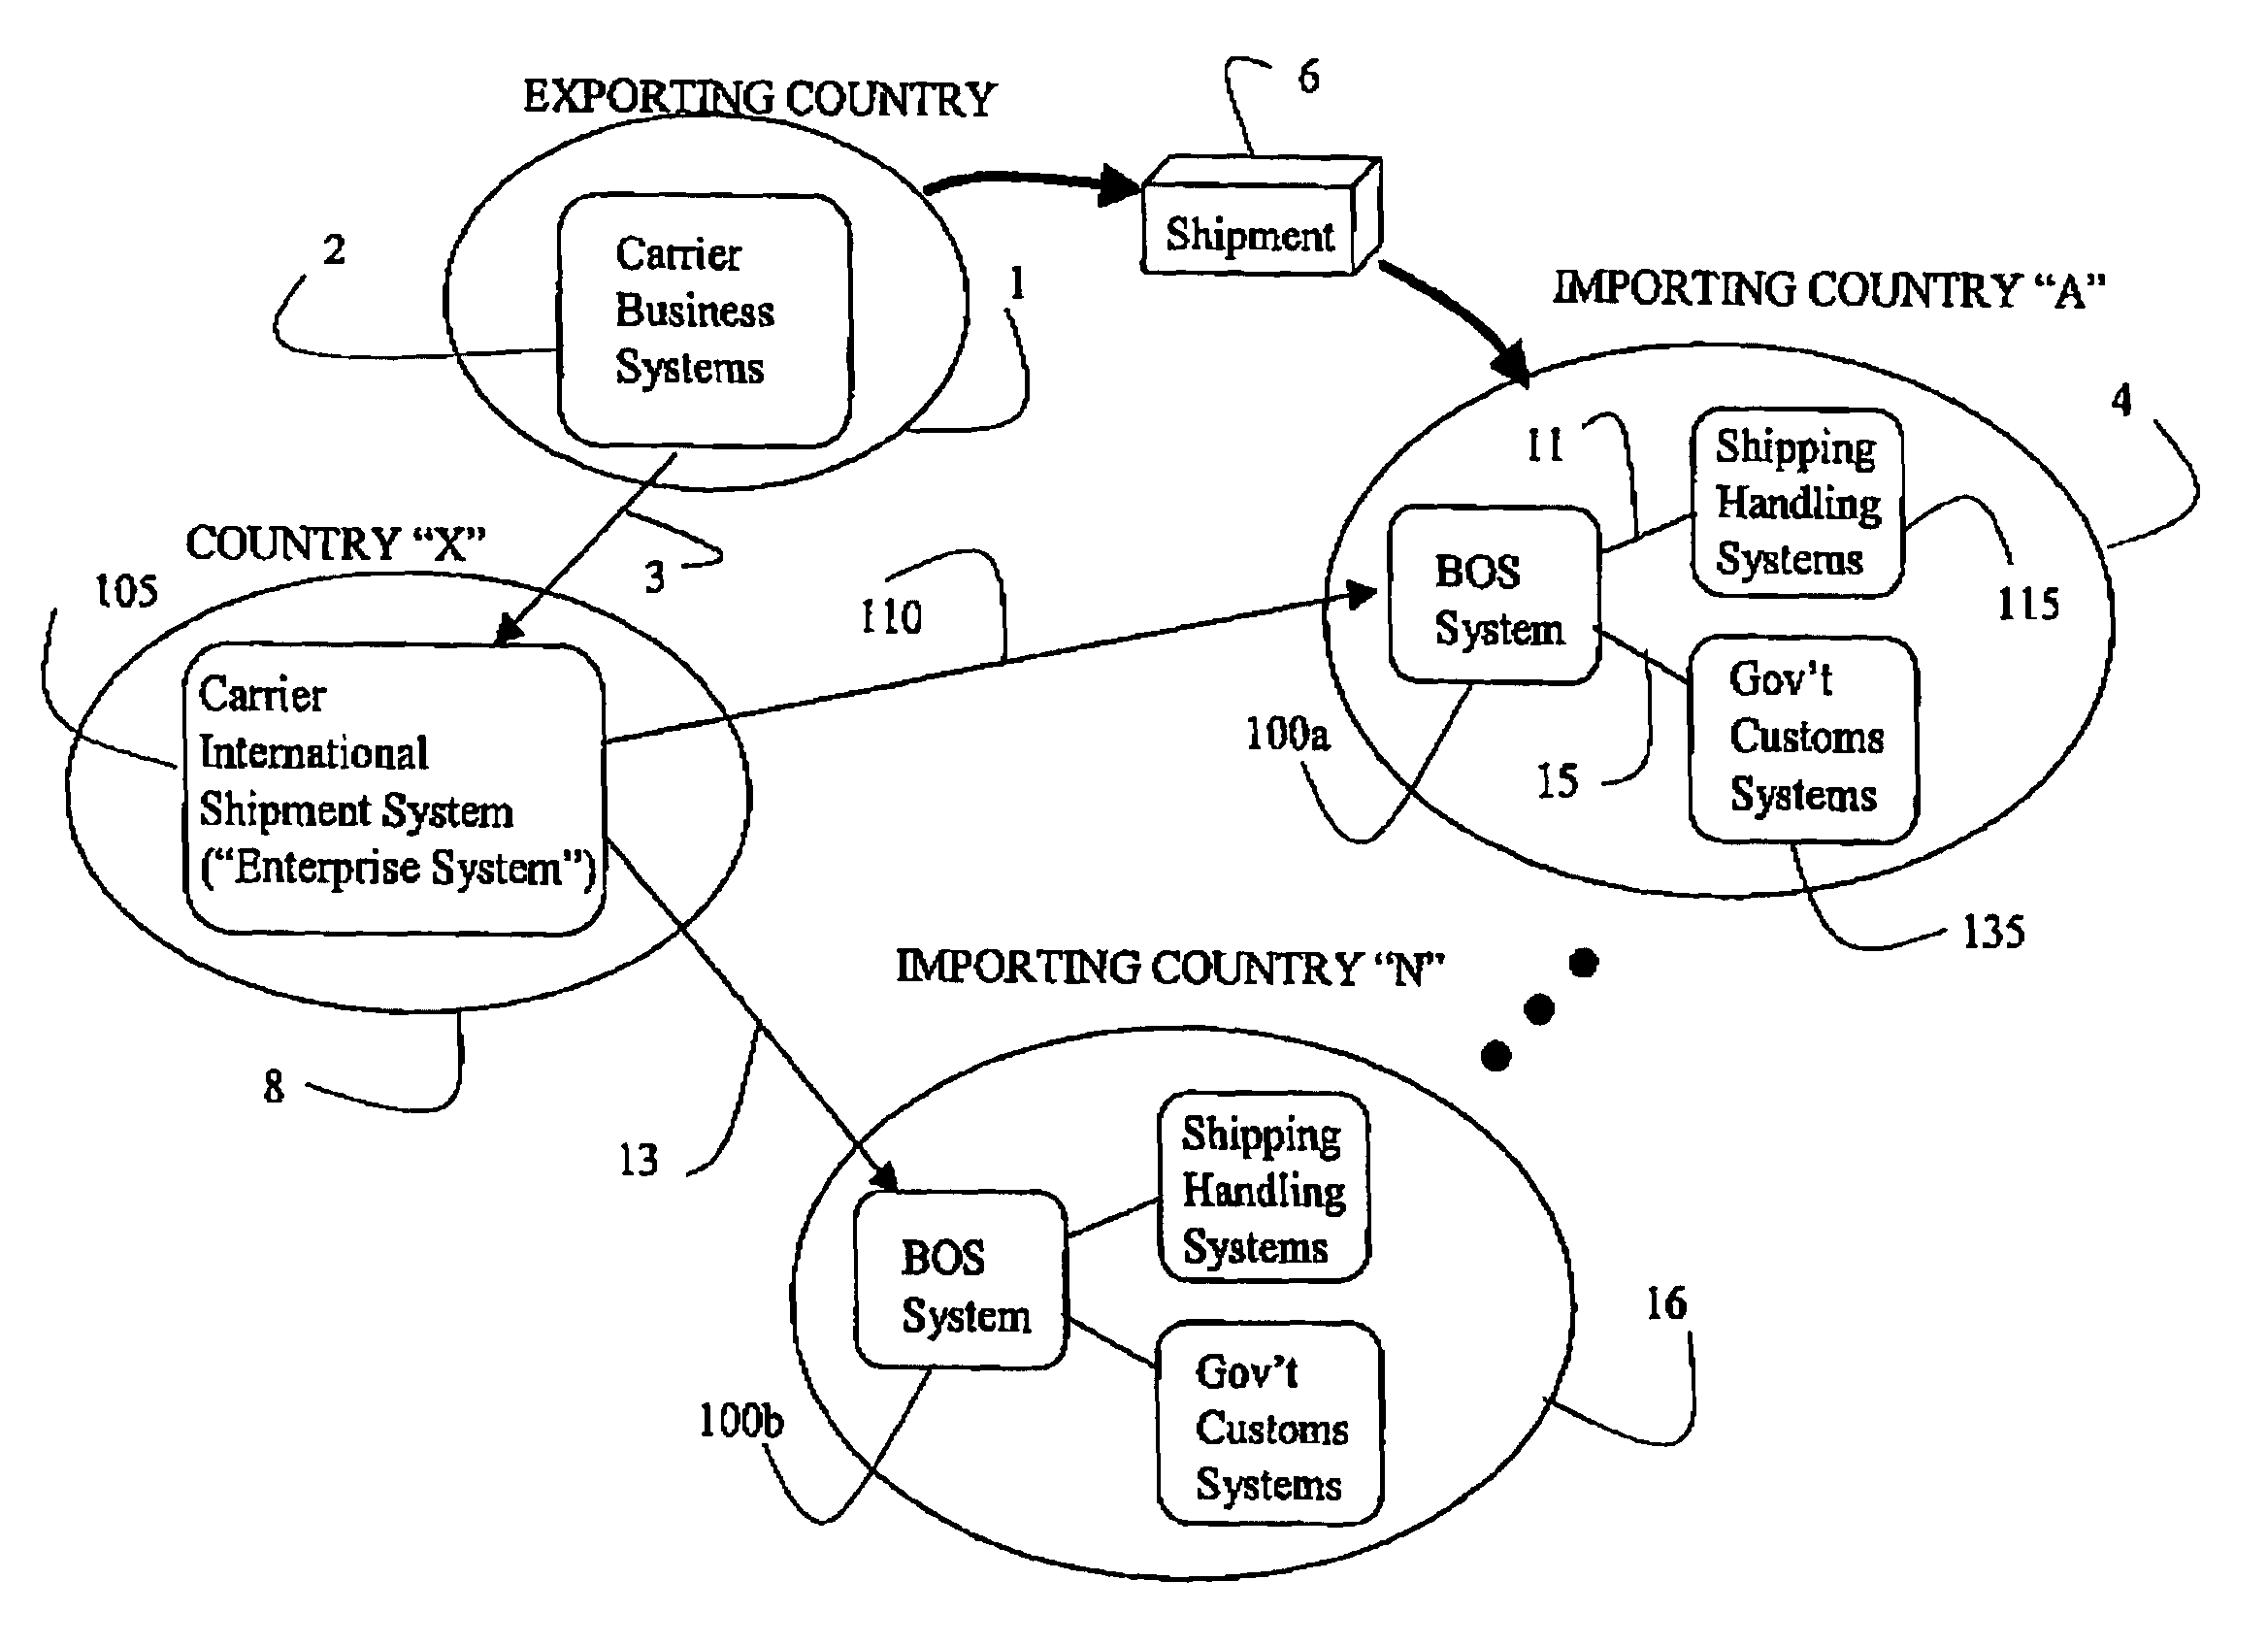 Systems and methods for international shipping and brokerage operations support processing